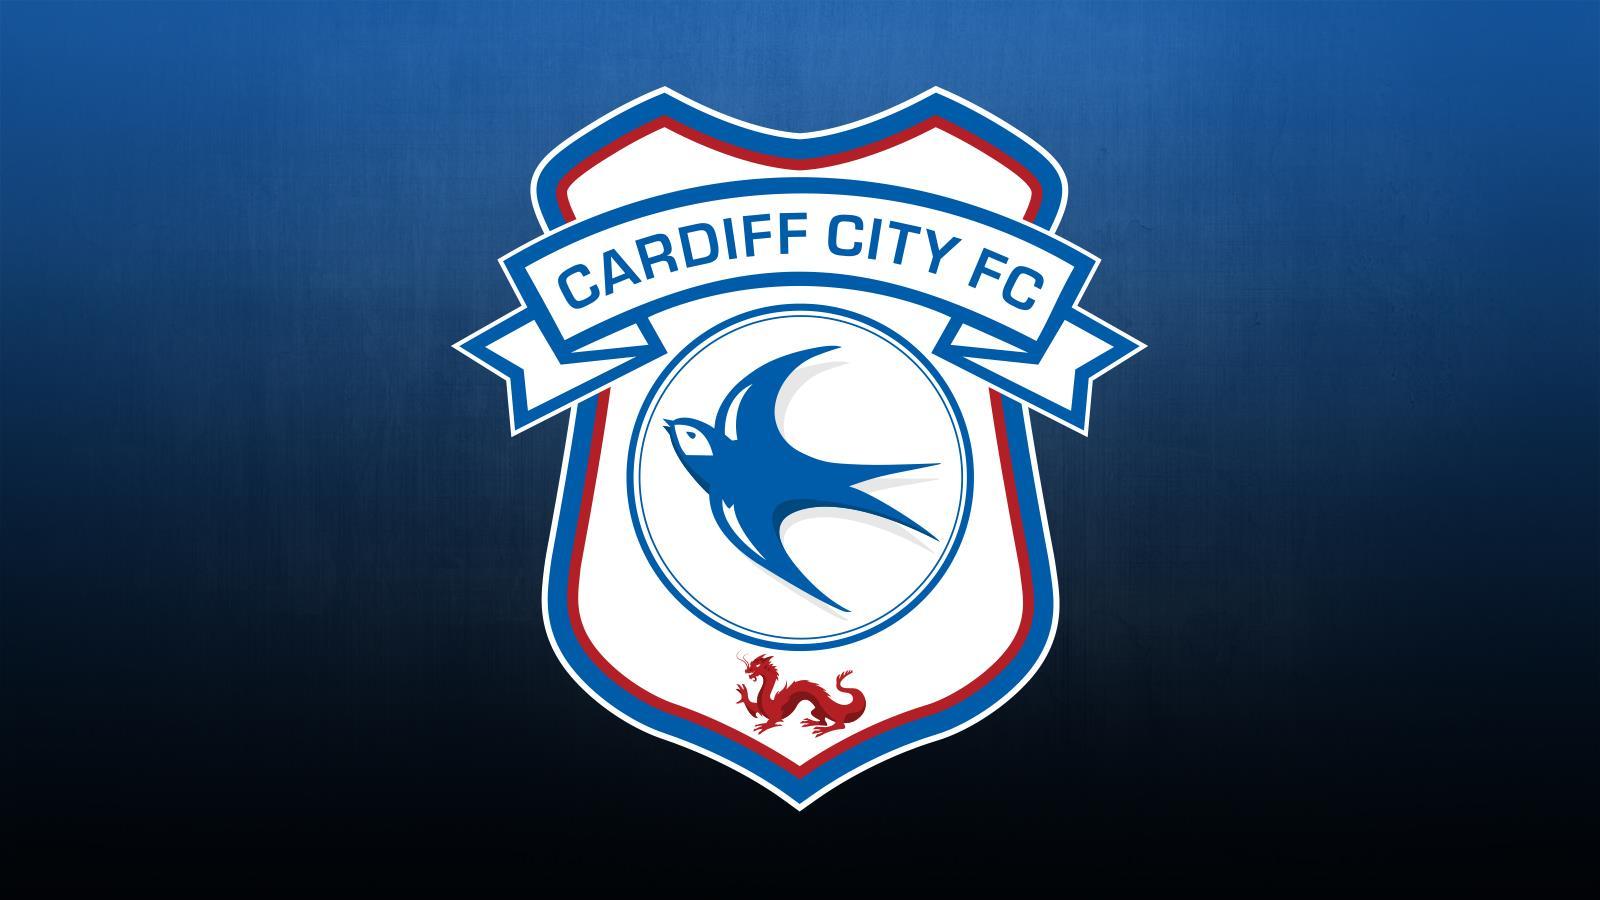 Cardiff City F.C. Wallpapers - Wallpaper Cave